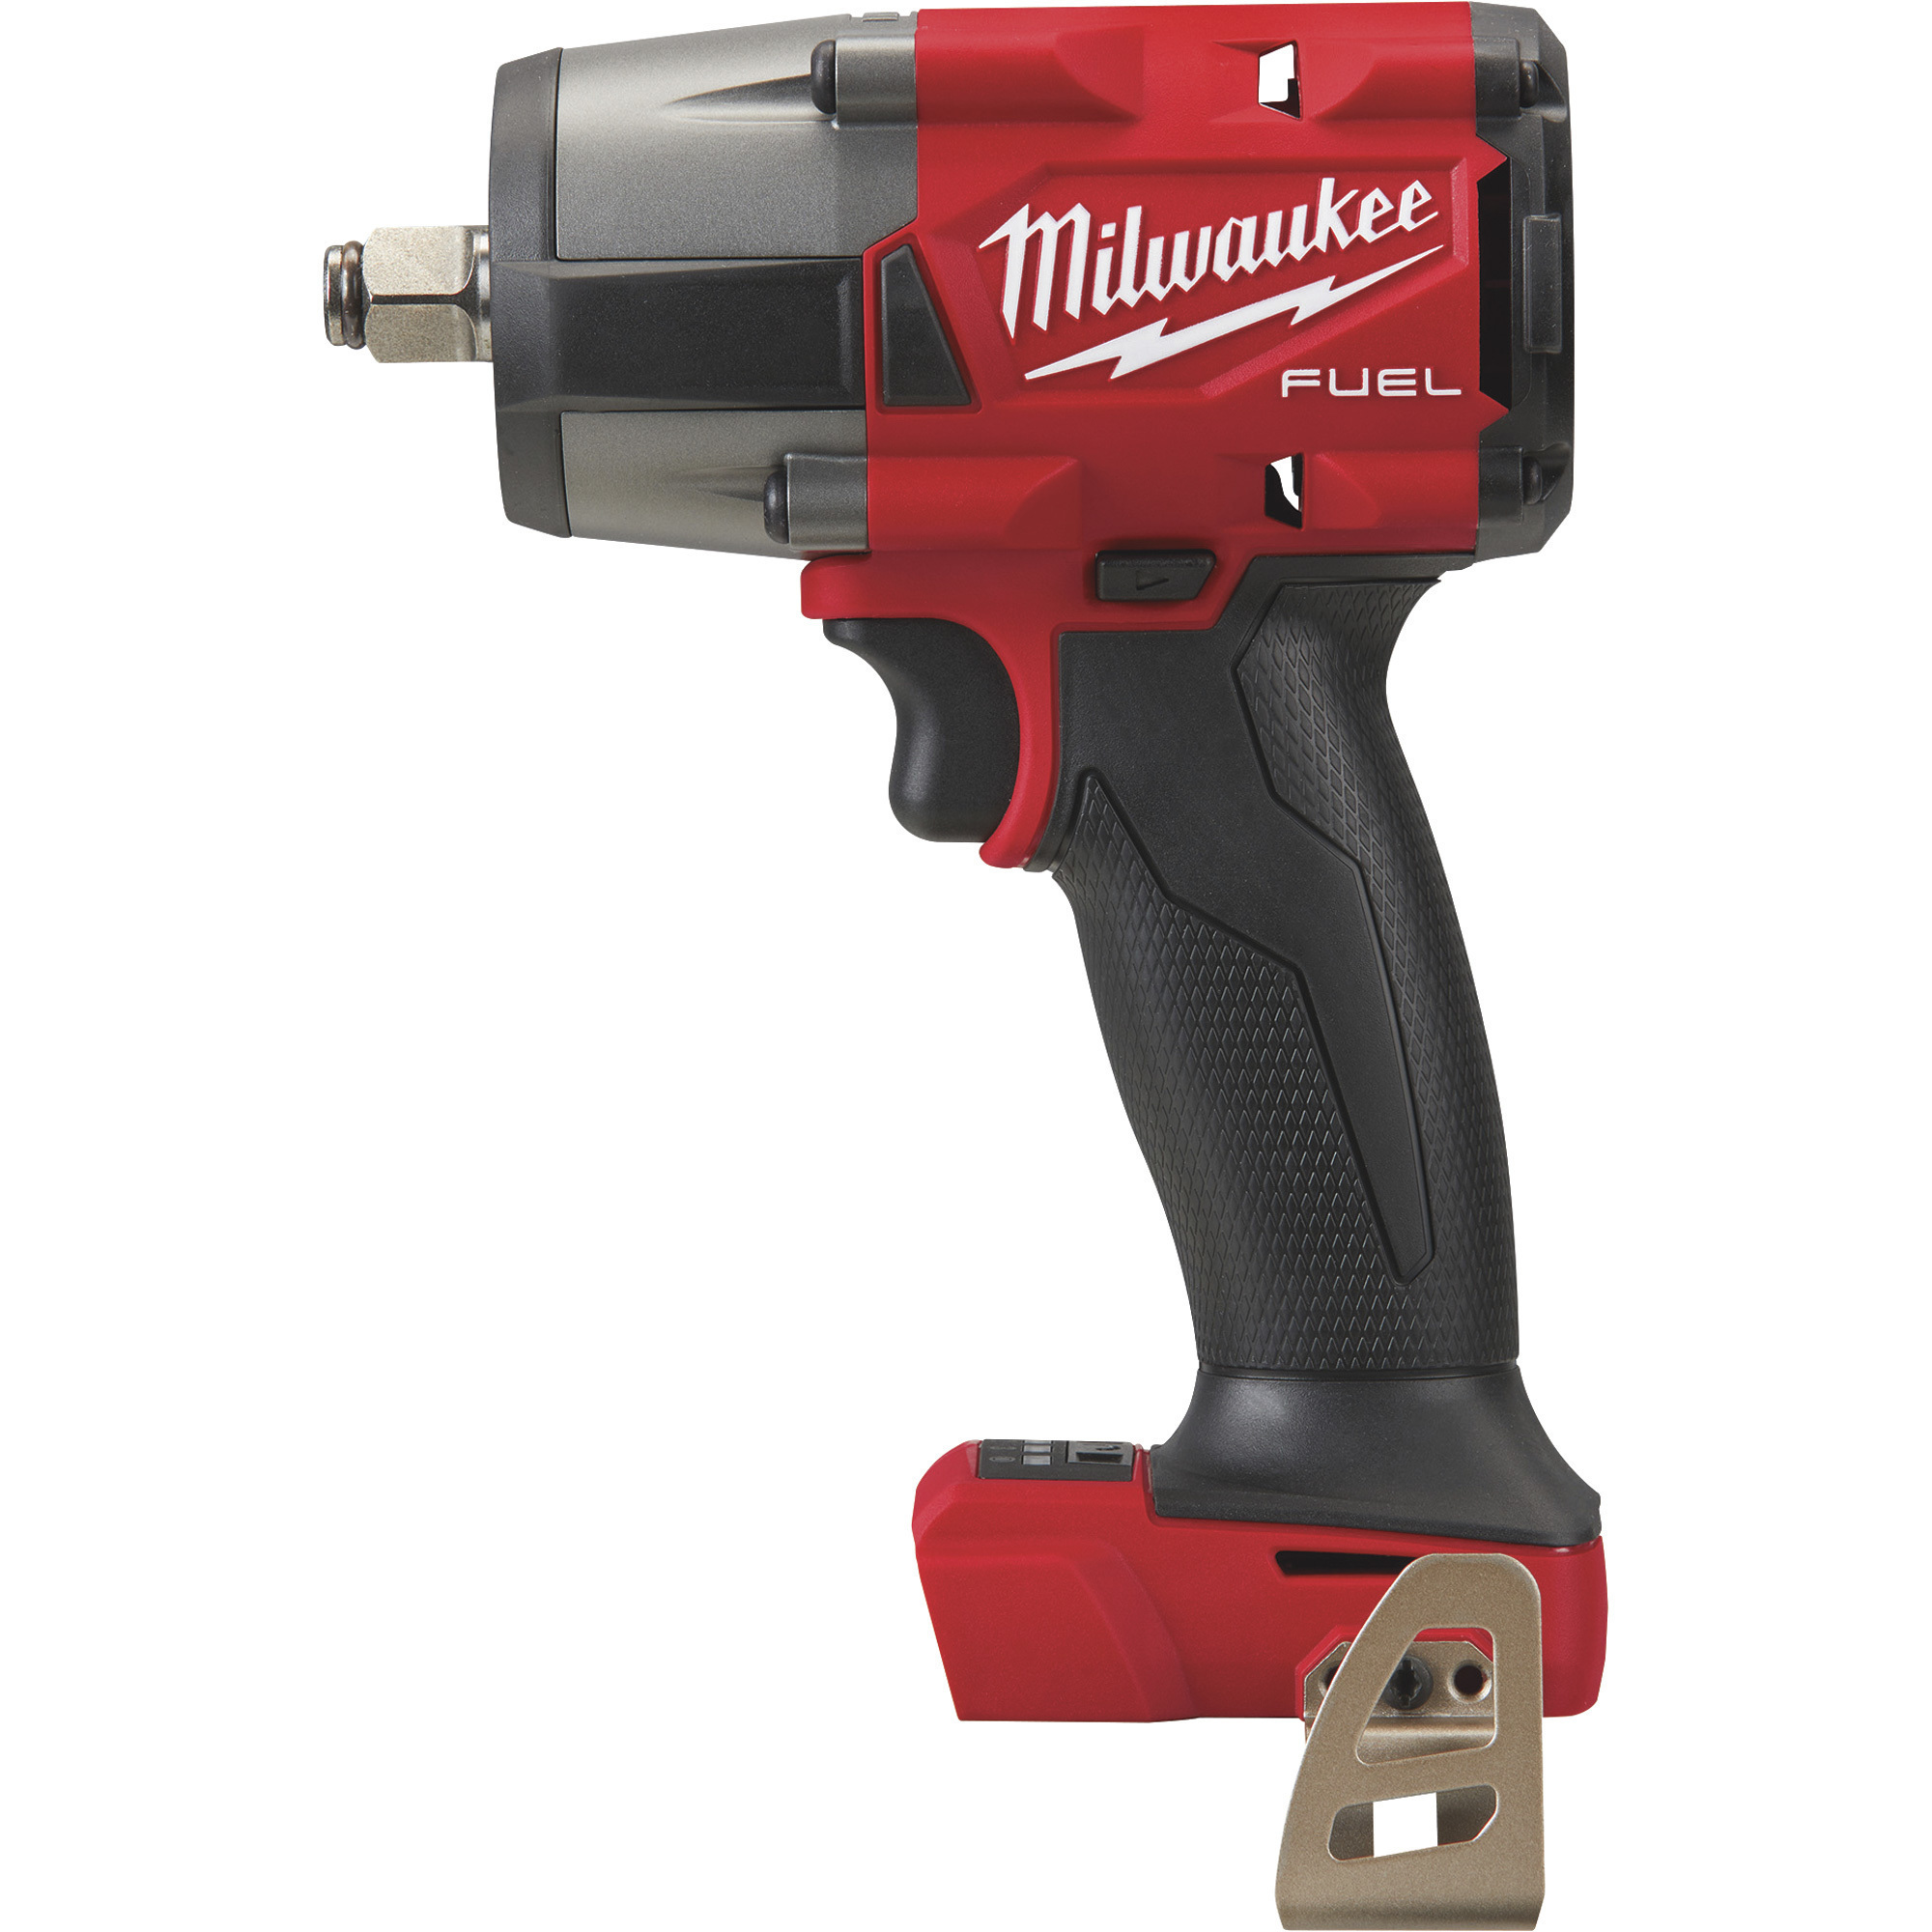 Milwaukee M18 FUEL Mid-Torque Impact Wrench with Friction Ring, Tool Only, 1/2Inch Drive, 650 Ft./Lbs. Torque, Model 2962-20